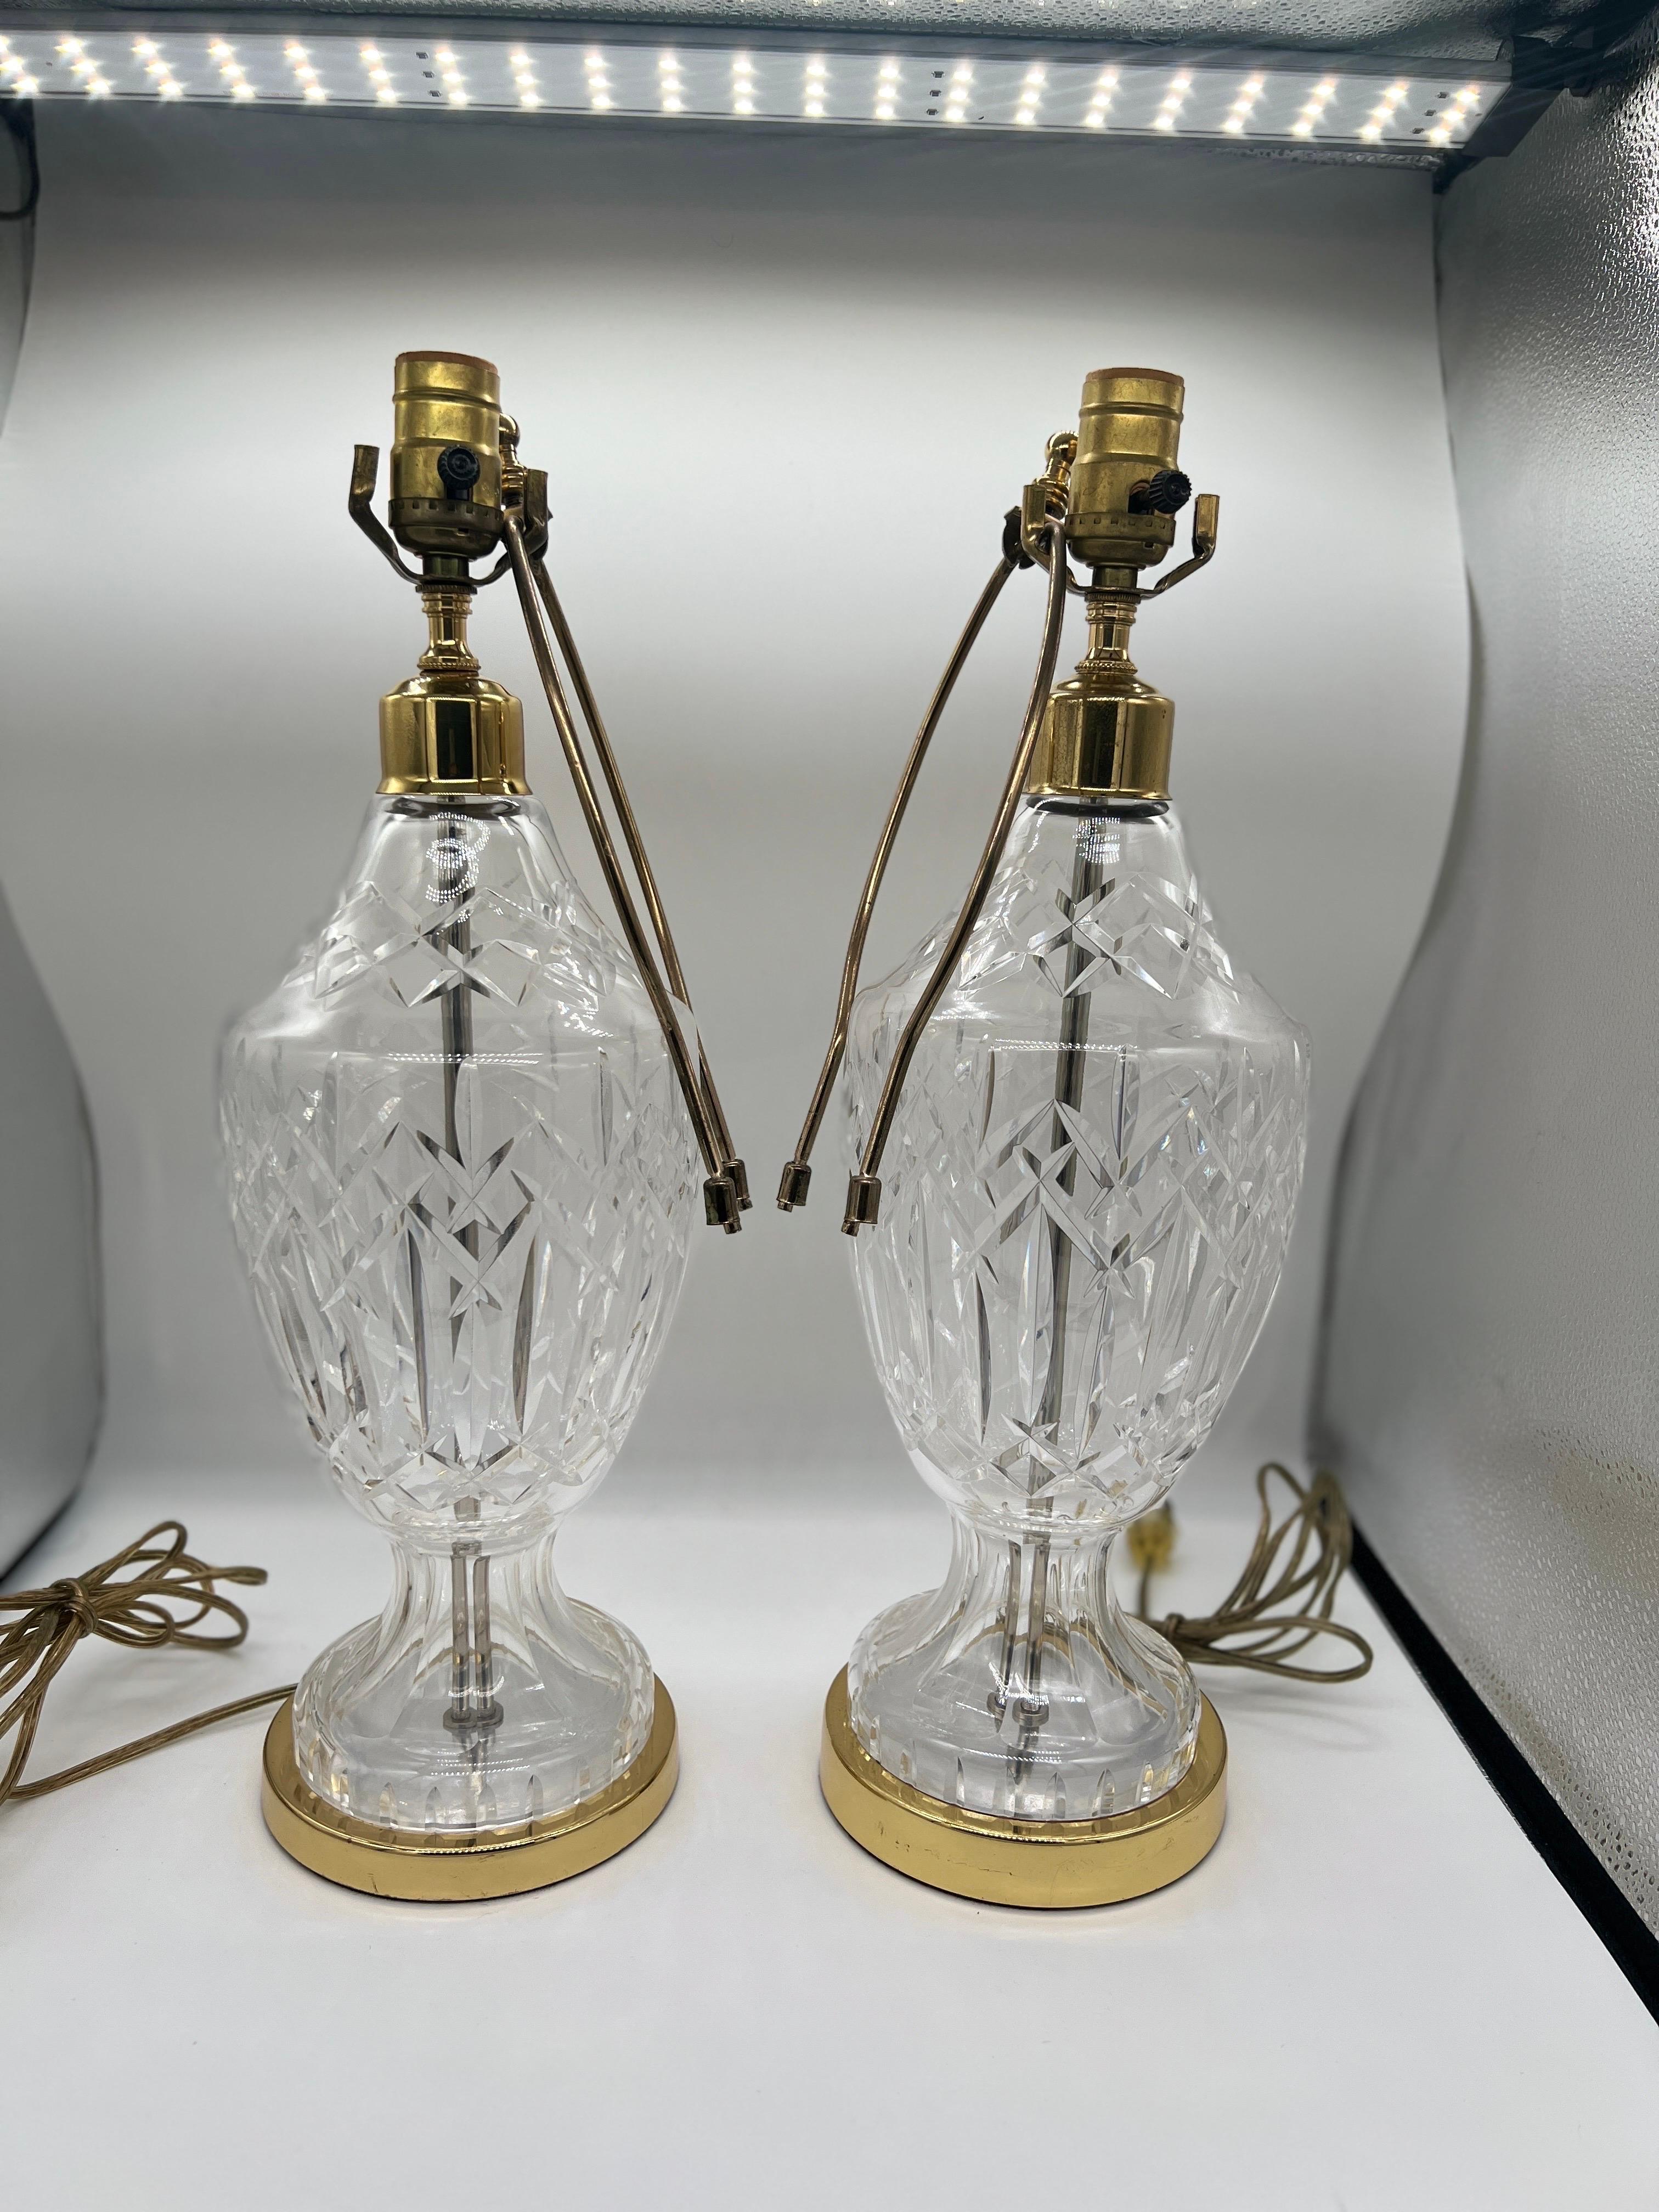 Pair, Vintage Waterford Cut Crystal & Brass “Lismore” Pattern Table Lamps. 19” measures to top of socket, does not include harp measurement.